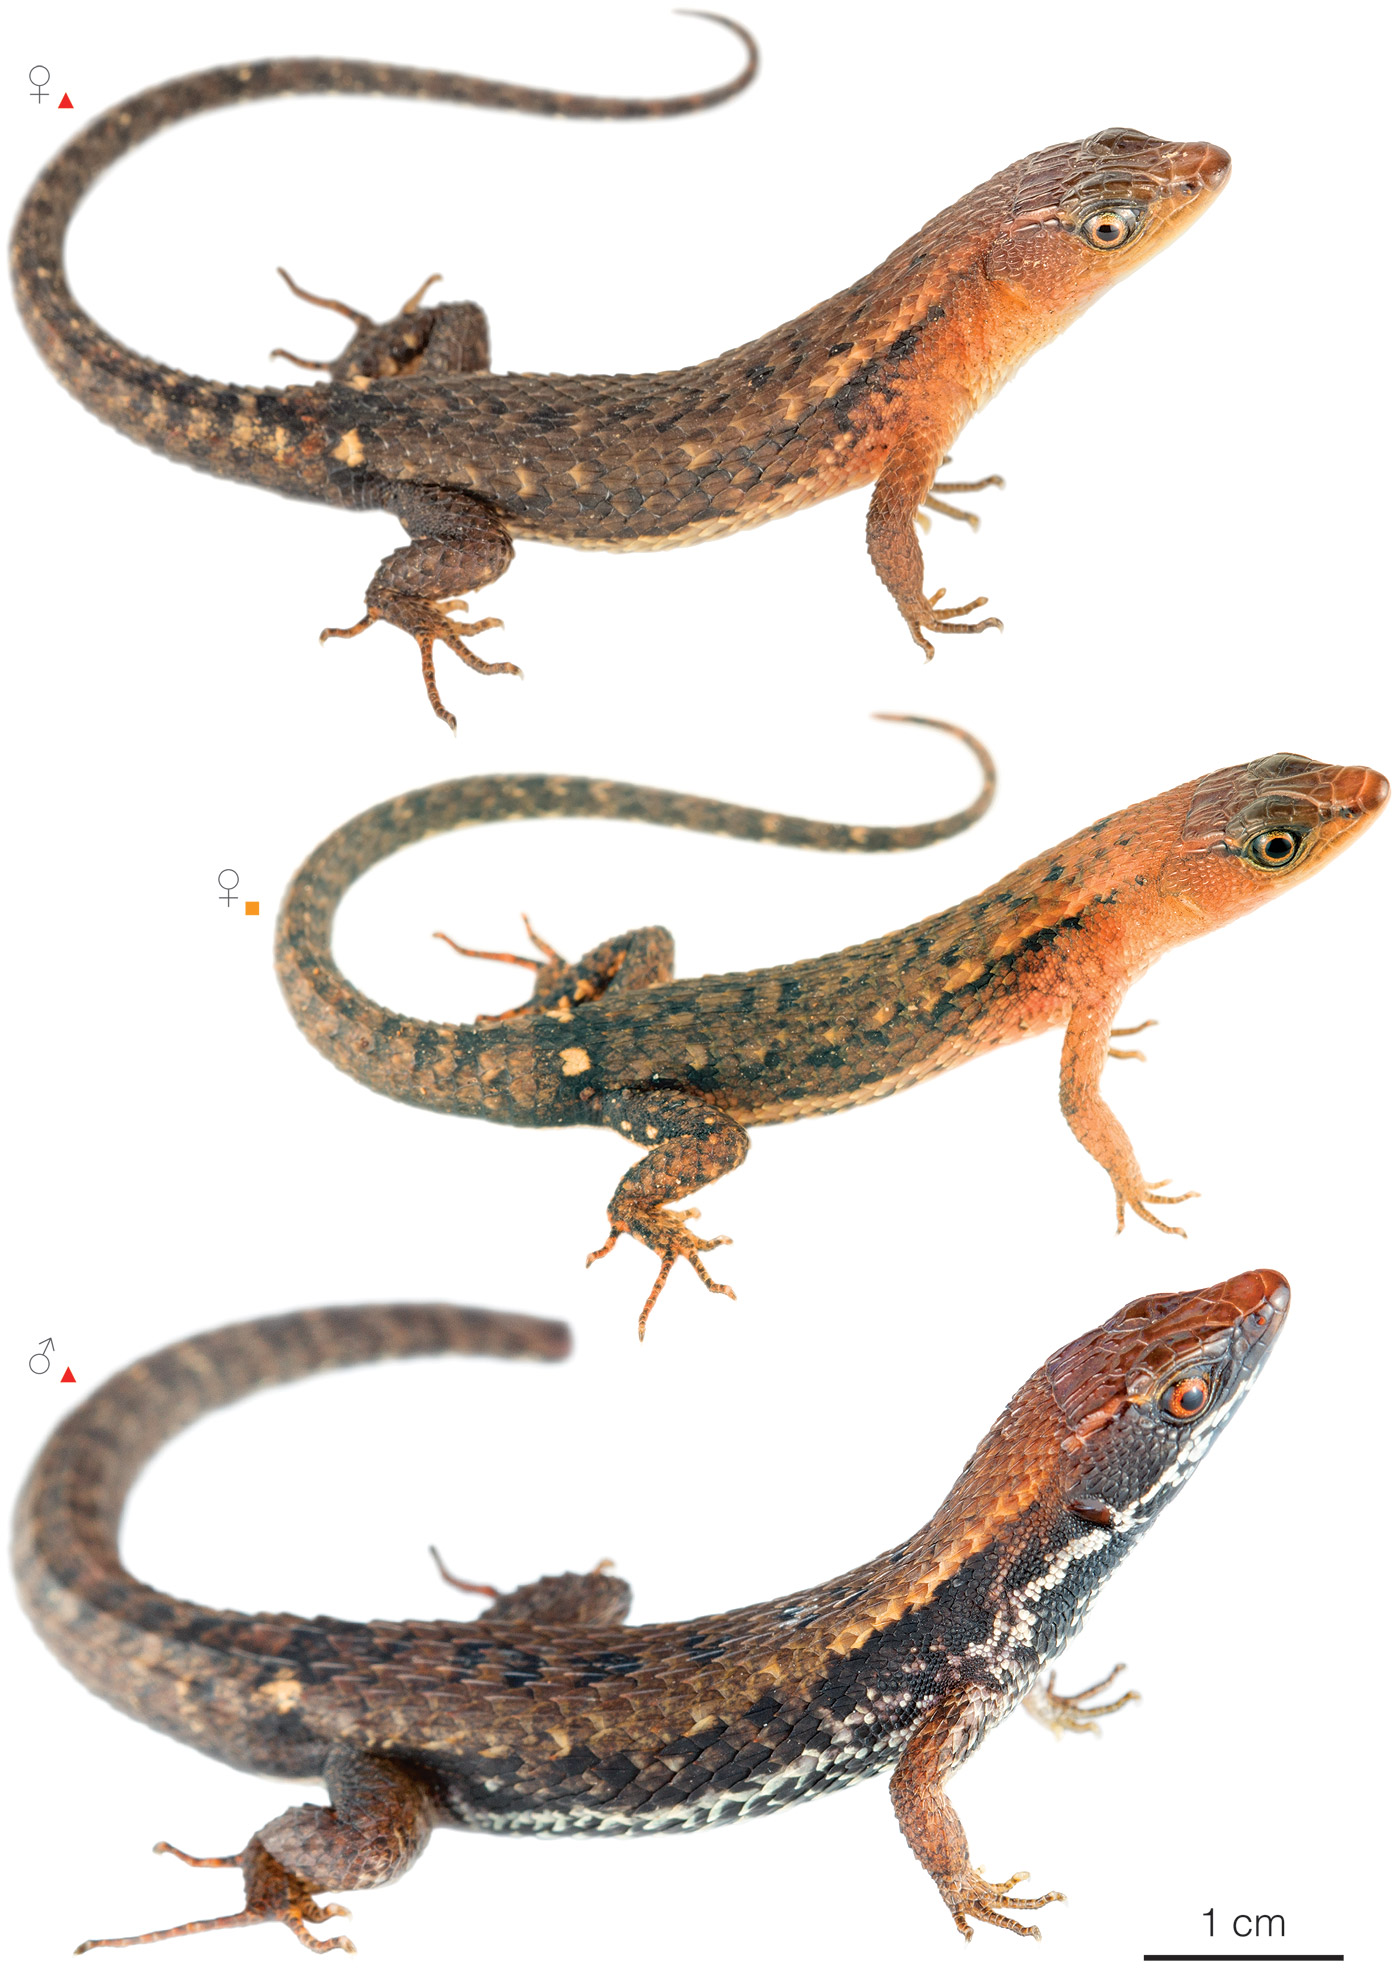 Figure showing variation among individuals of Alopoglossus atriventris